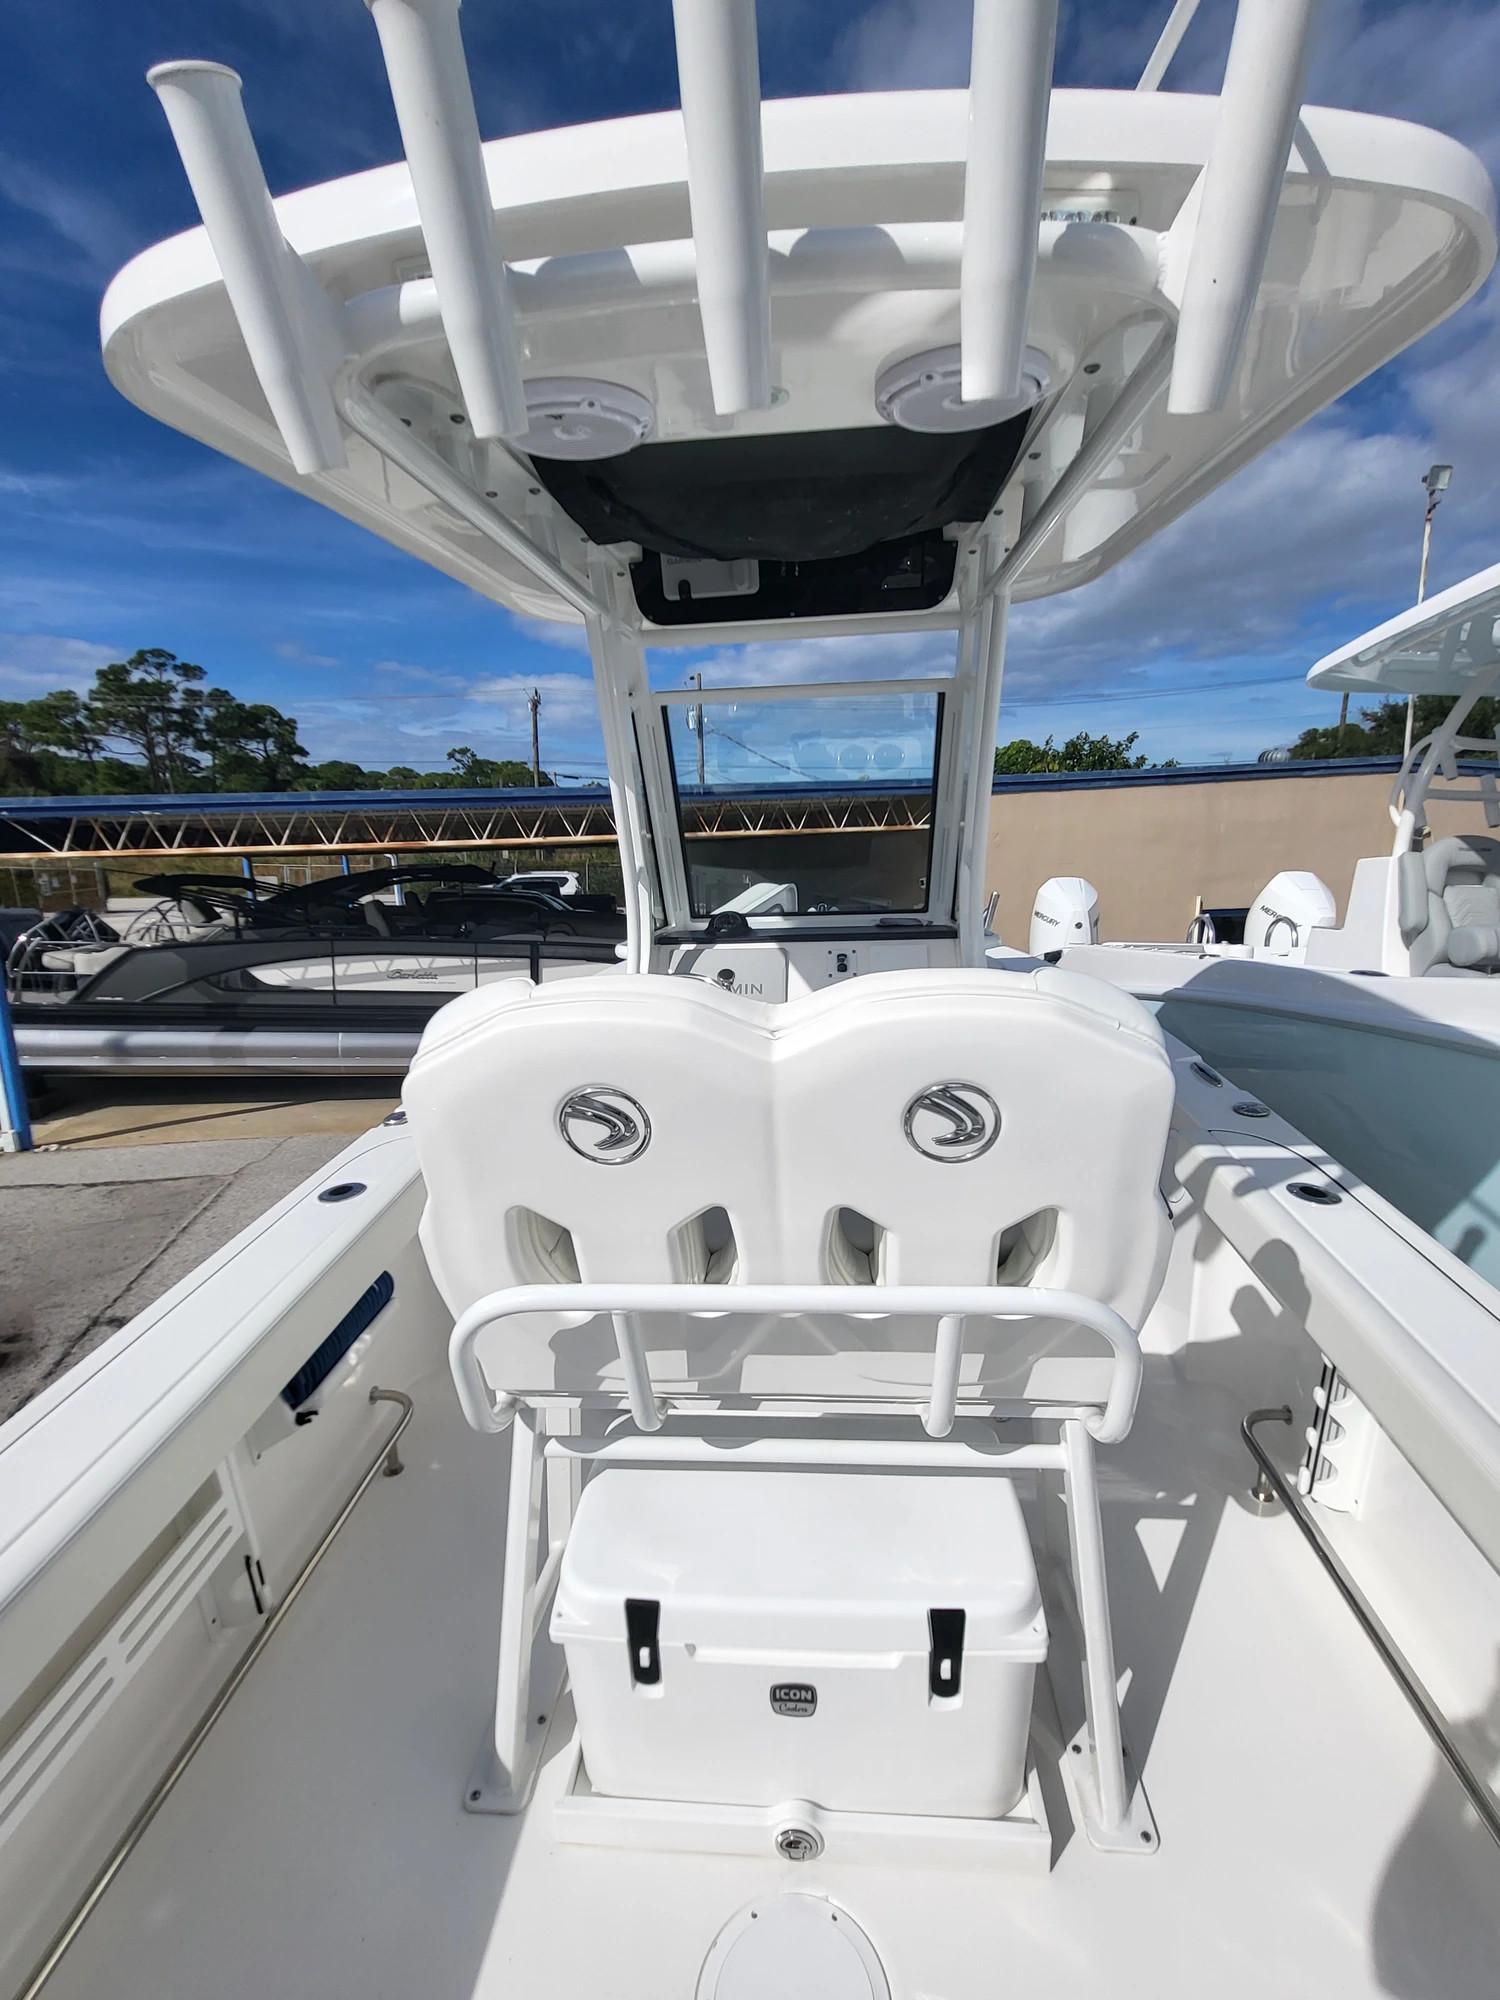 2023 Edgewater 230 CC Center Console for sale - YachtWorld